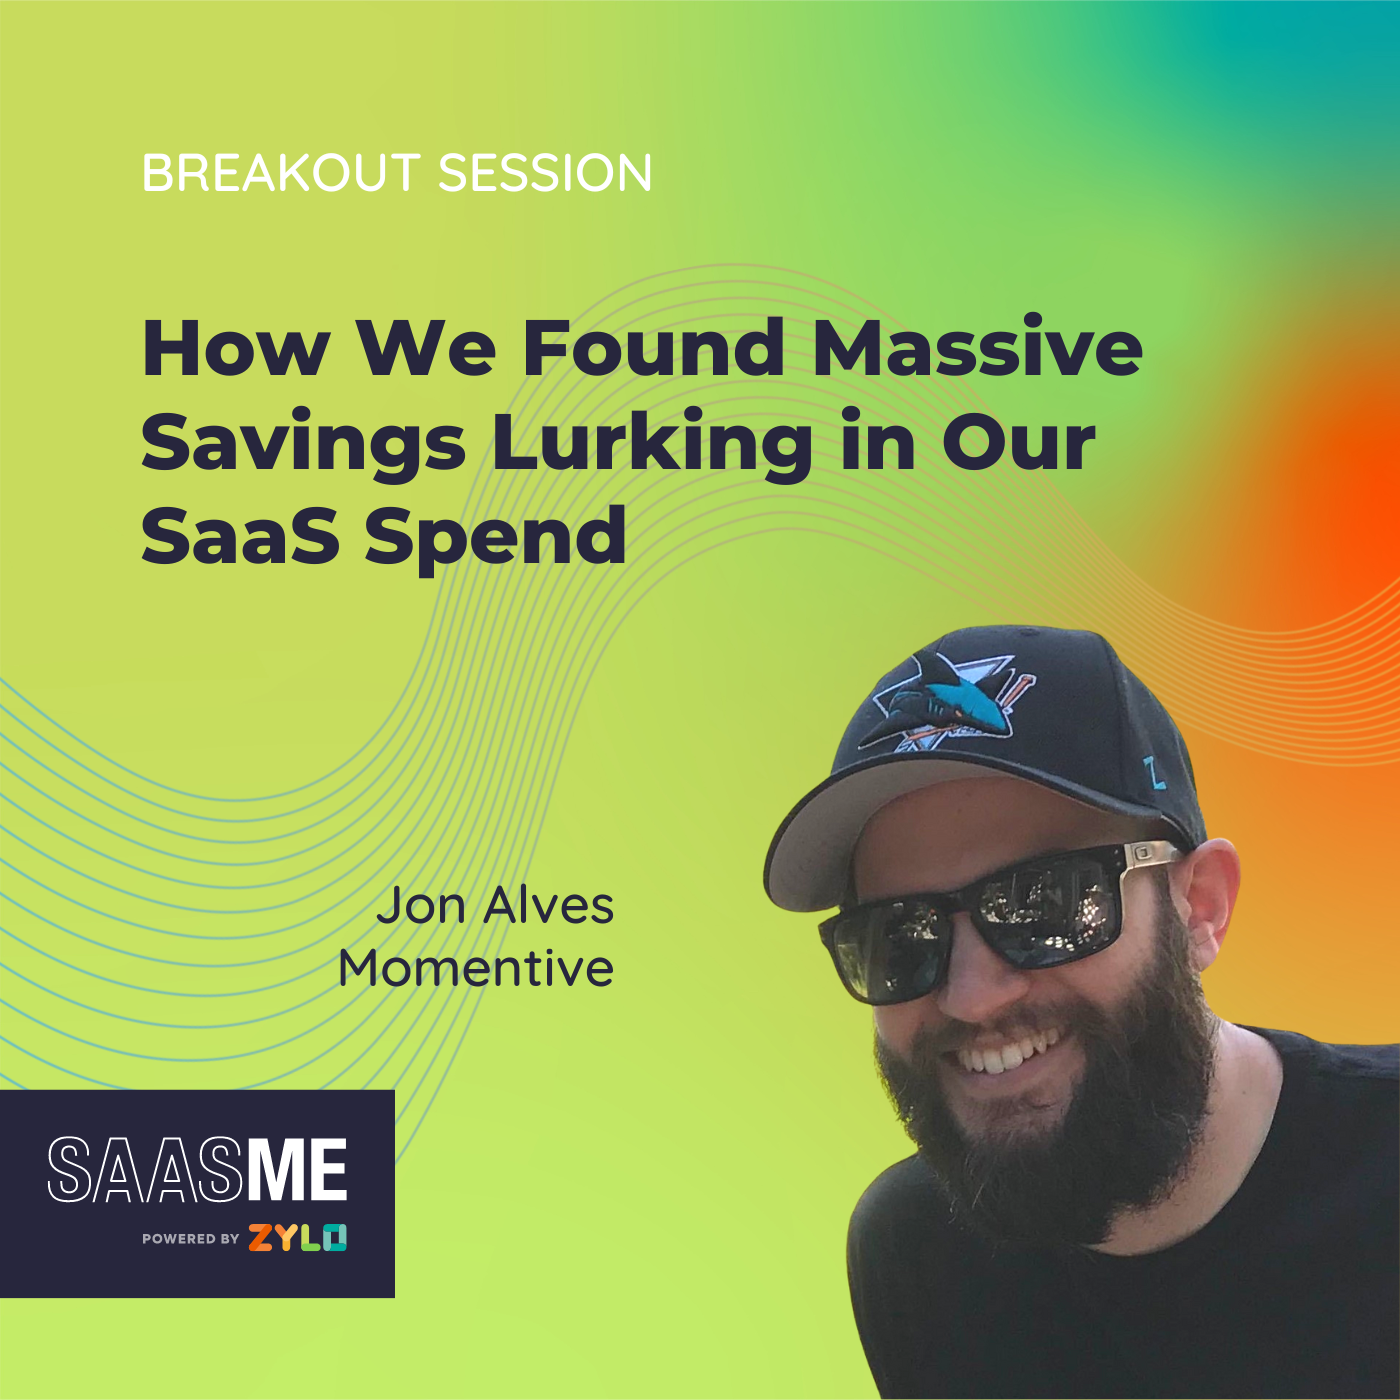 How We Found Massive Savings Lurking in Our SaaS Spend